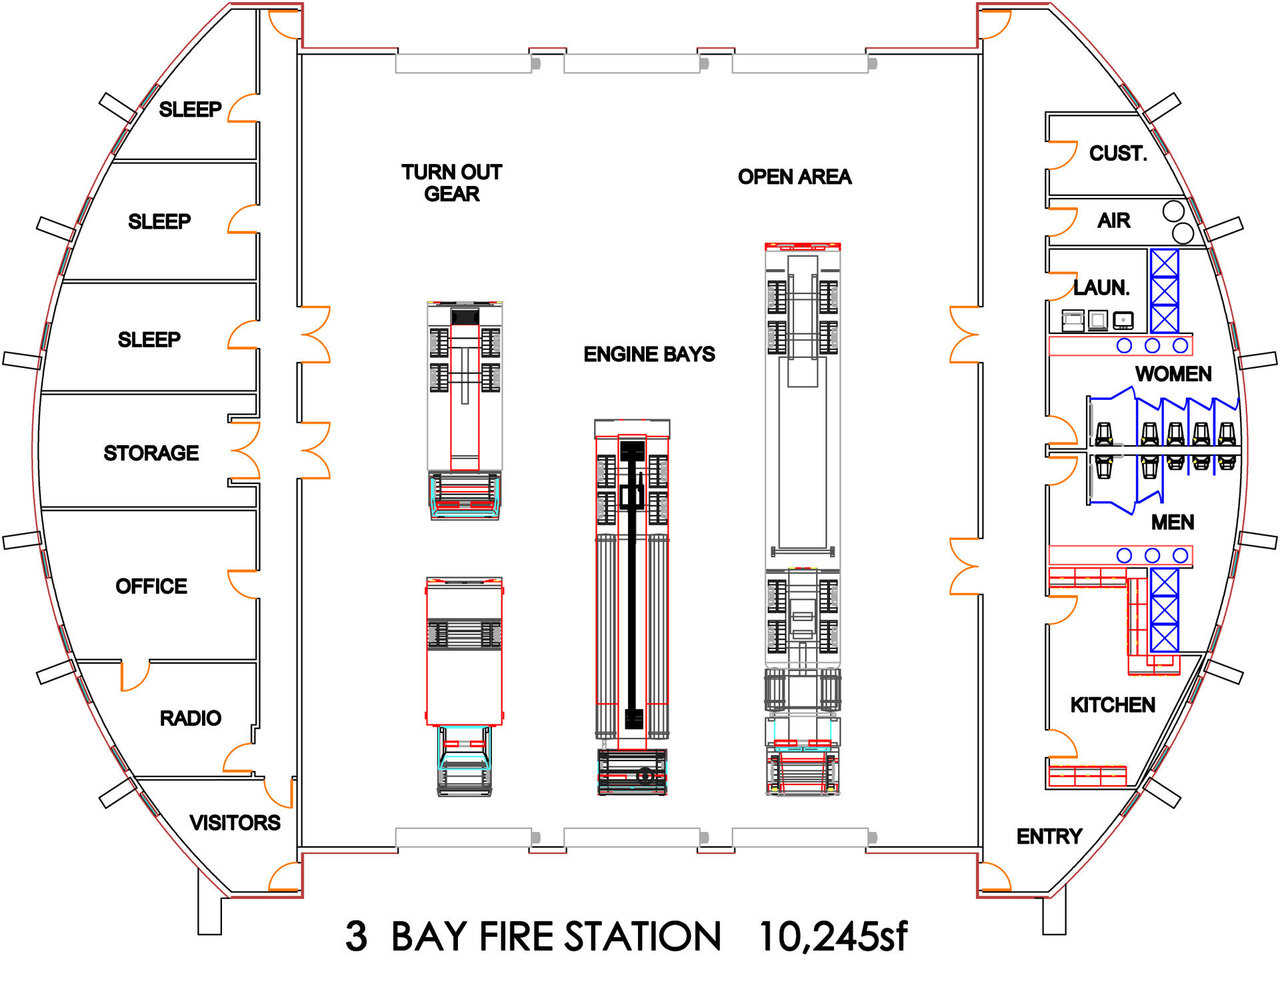 Three Bay Fire Station  — Its 10,245 square feet include sleeping, kitchen and bathroom facilities for both women and men, as well as offices and a visitors’ area.